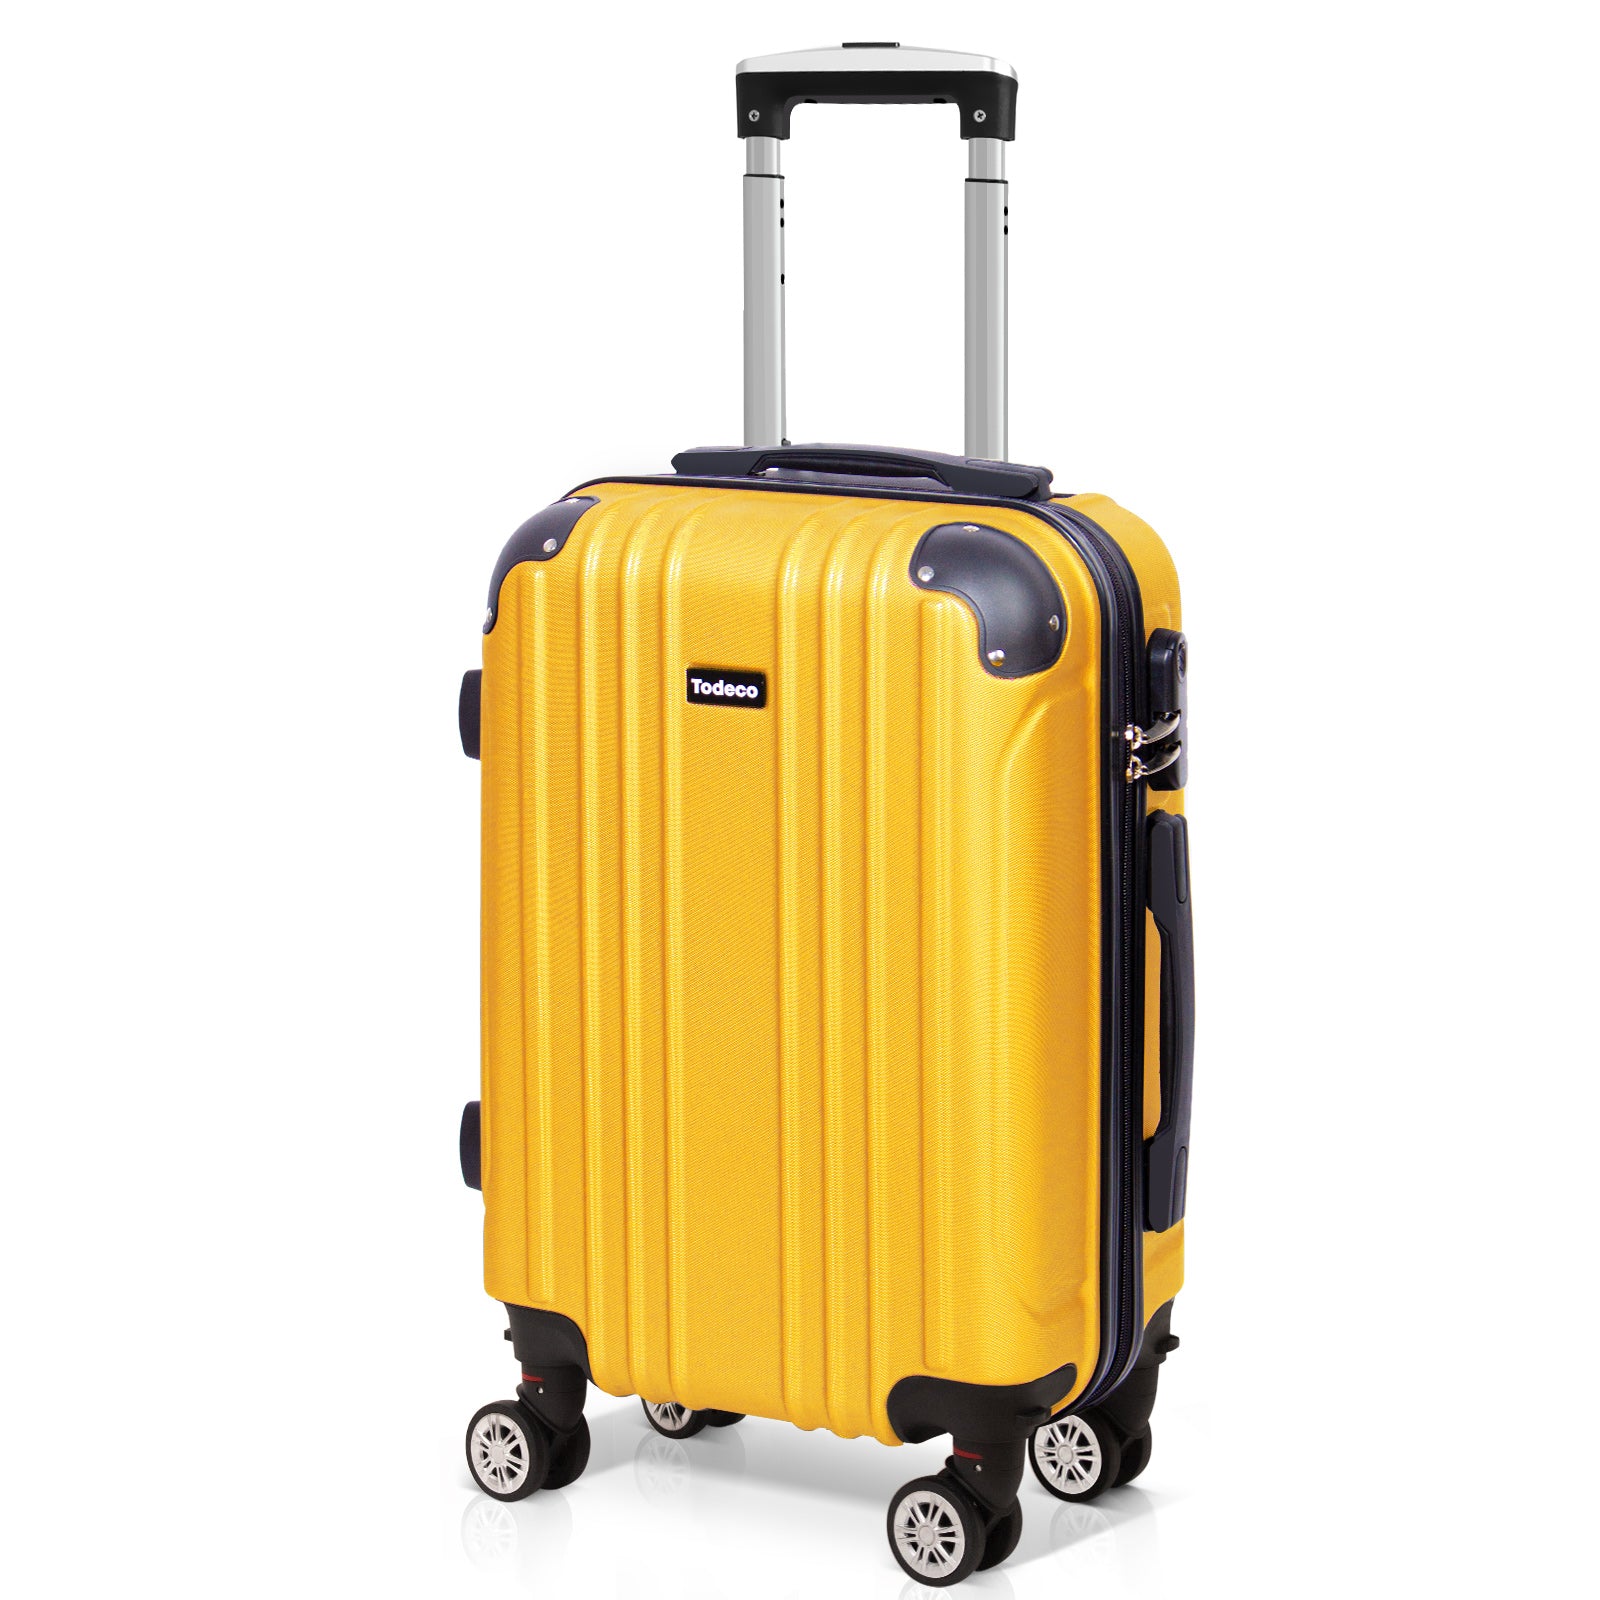 Cabin-Suitcase-55cm-Lightweight-Carry-on-Suitcase-with-Hard-Shell-Travel-Suitcase-Rigid-and-Lightweight-ABS-with-4-Double-Wheels-55x35x22cm-Lemon-Yellow